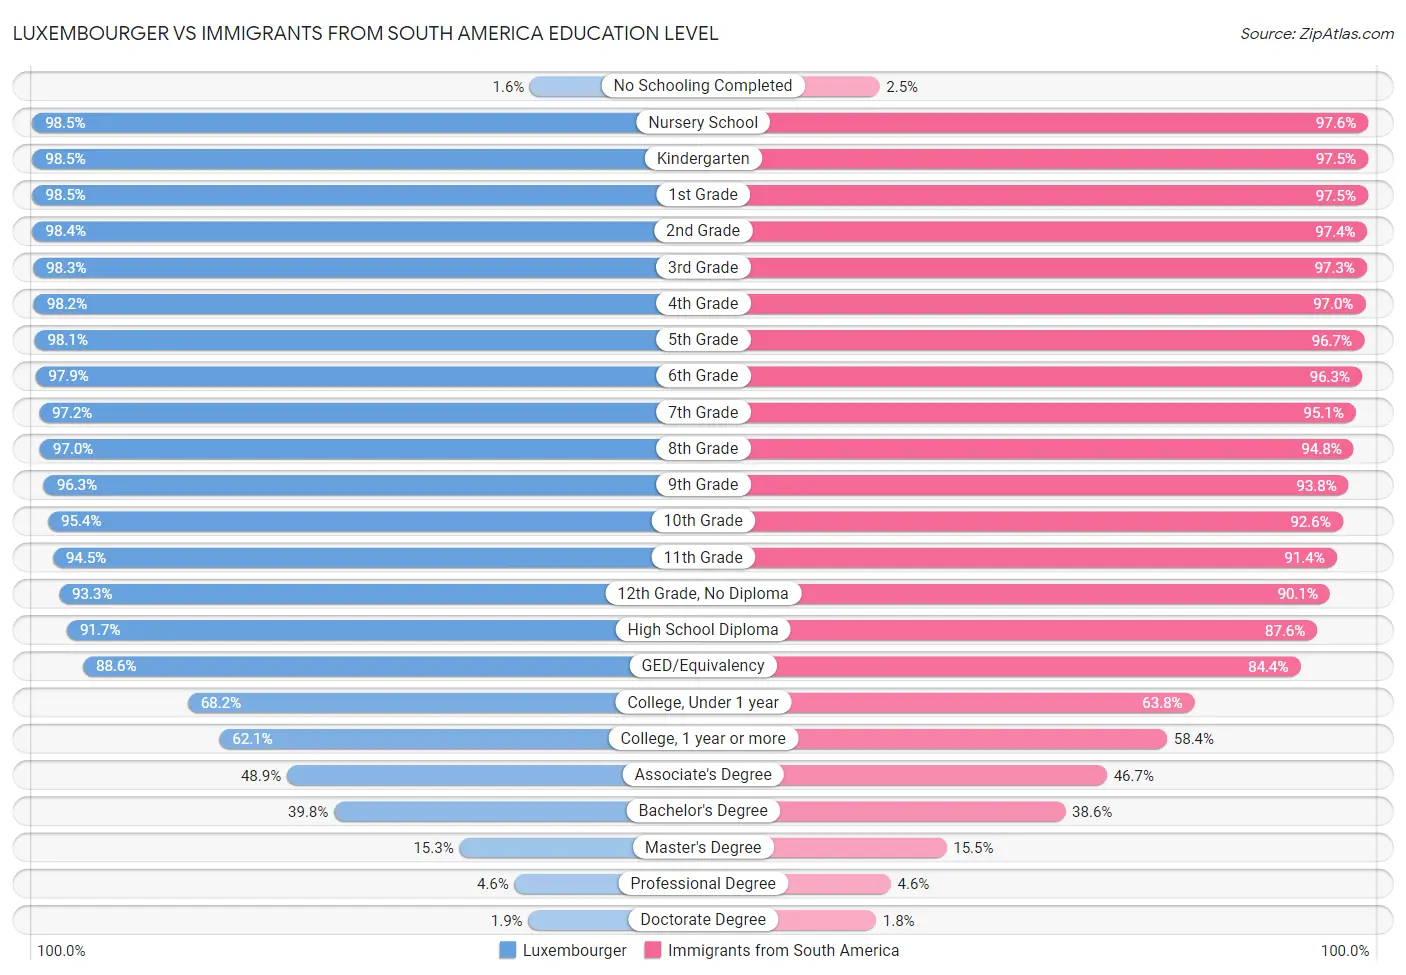 Luxembourger vs Immigrants from South America Education Level